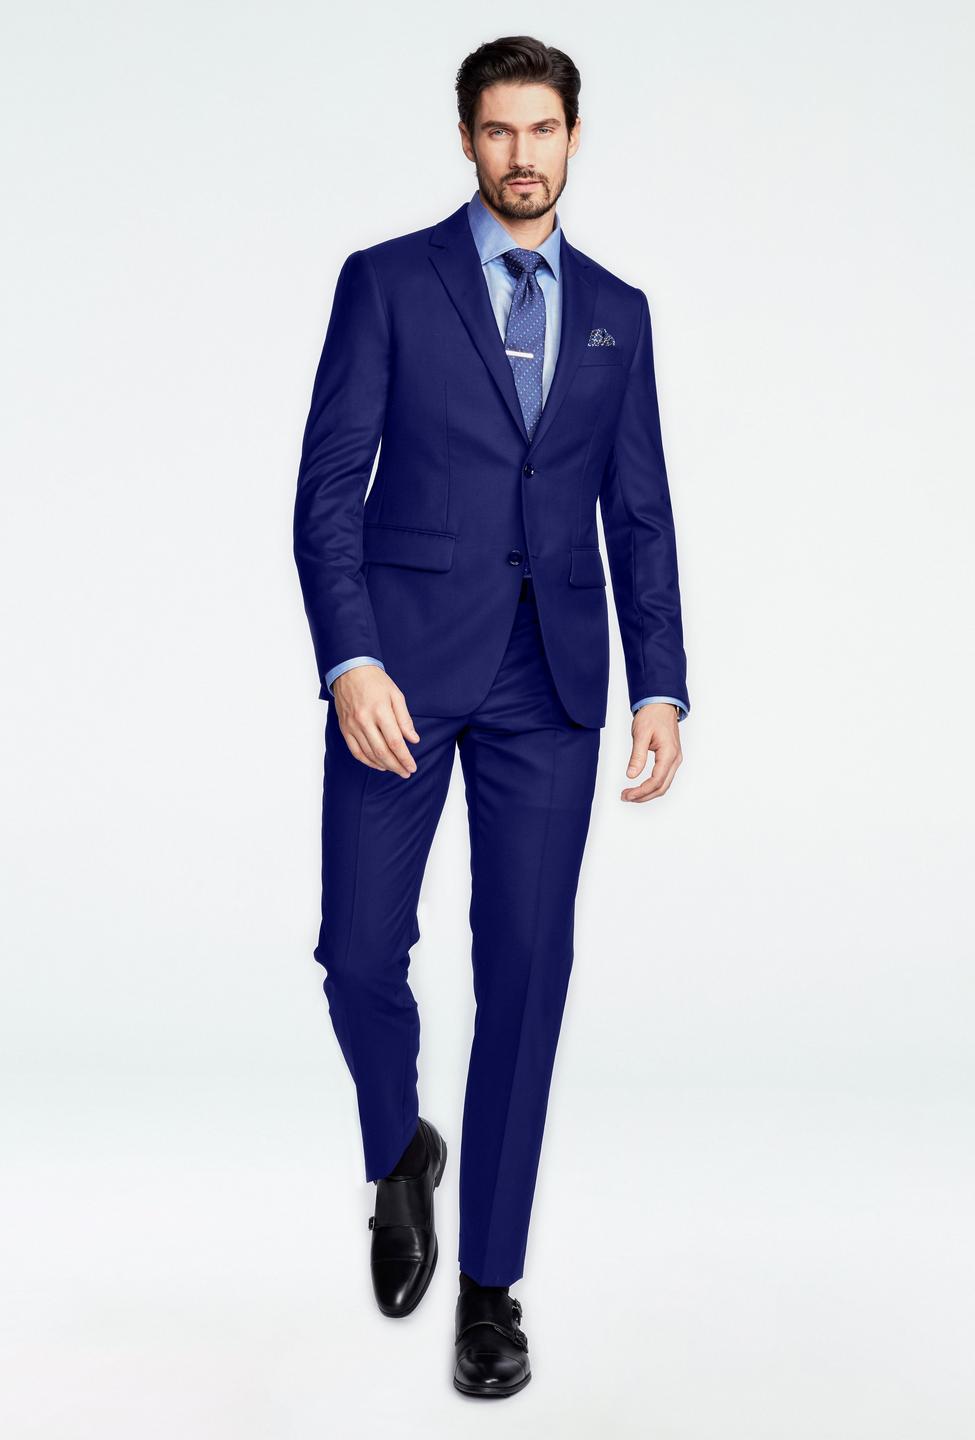 Blue suit - Solid Design from Luxury Indochino Collection